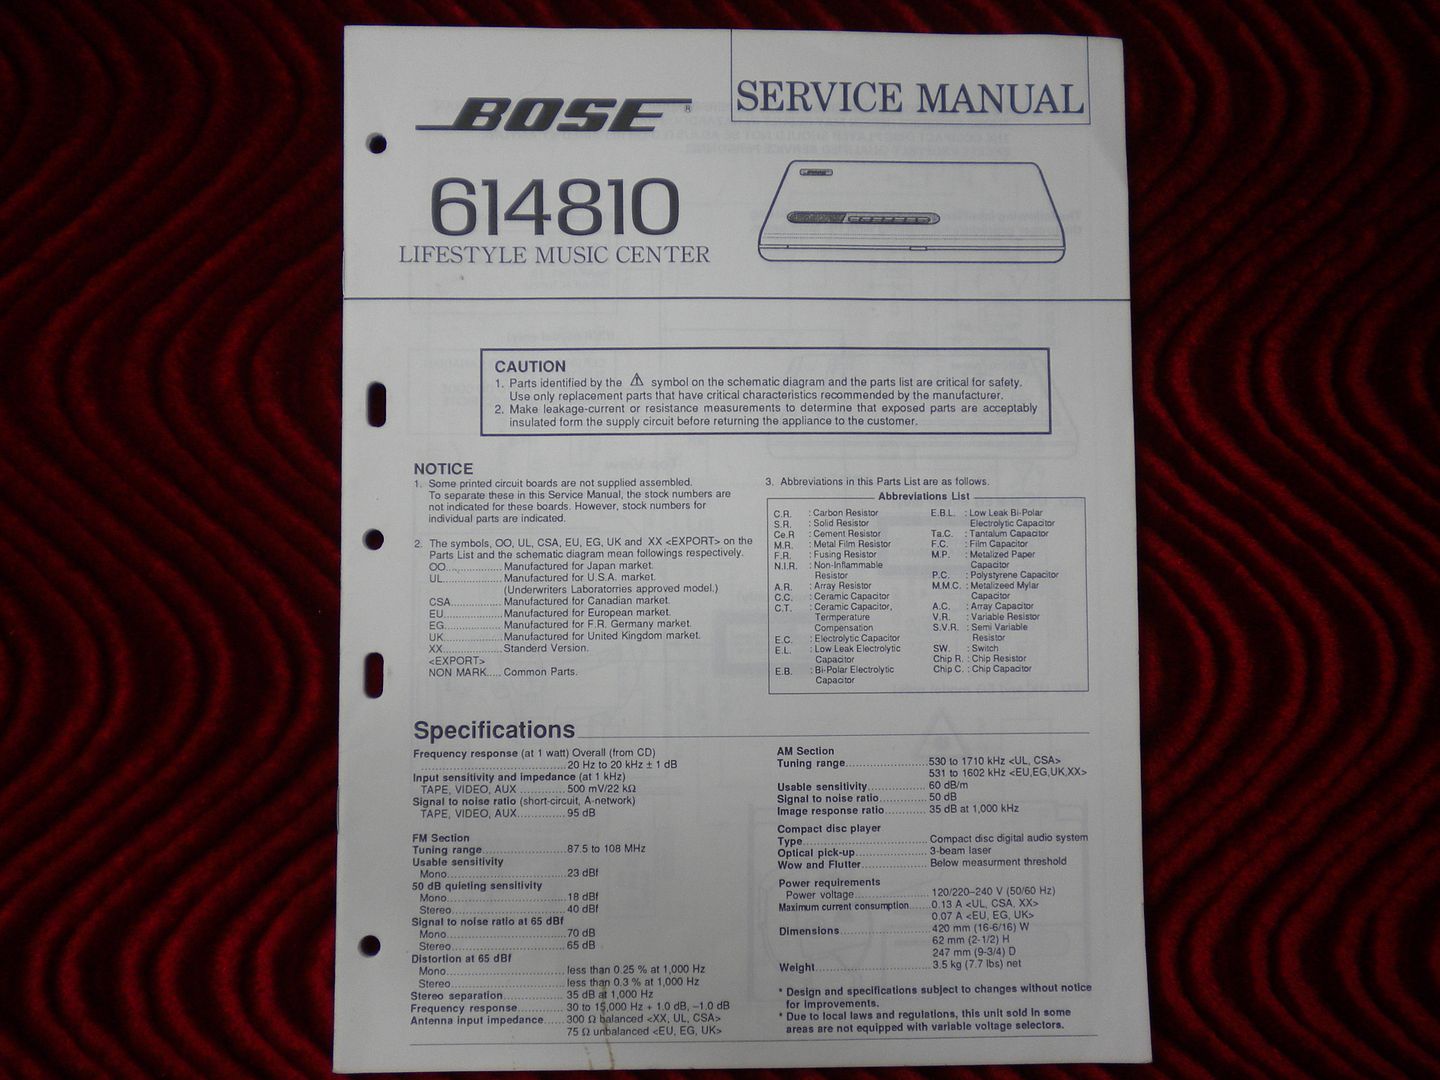 Original Factory Issued Service Repair Manual For The BOSE 614810